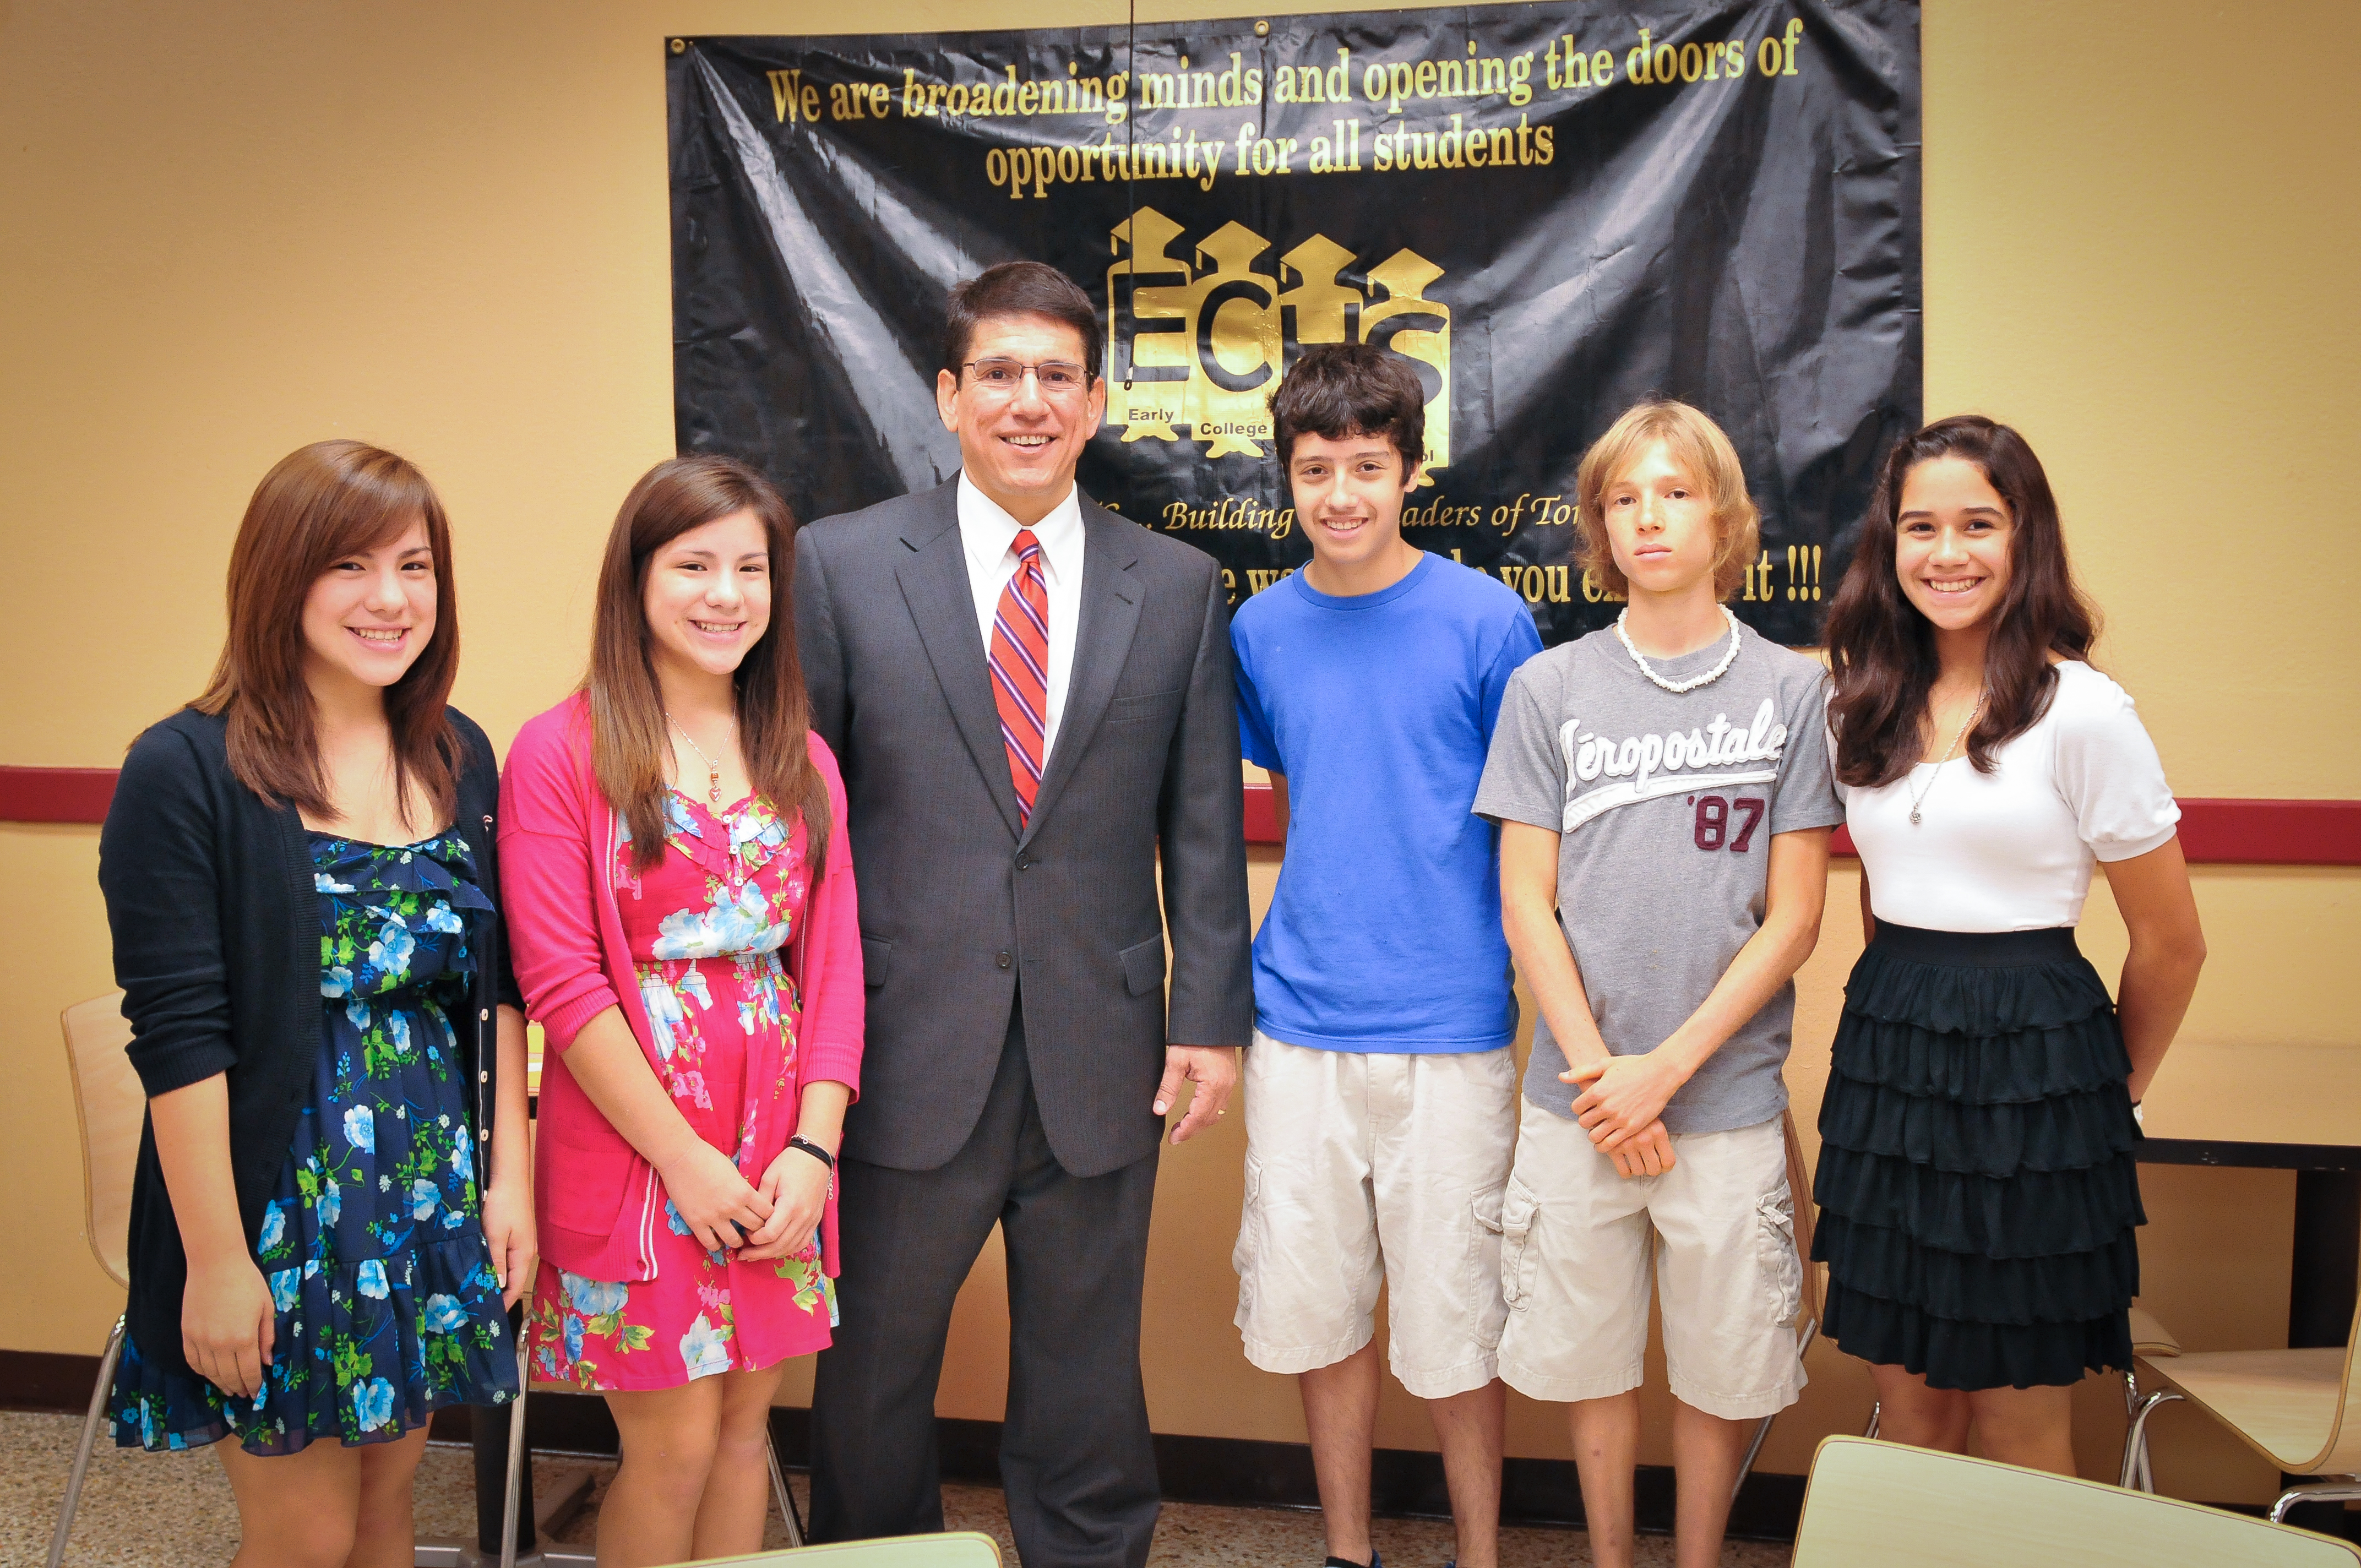 ECHS earns high ranking for excellence